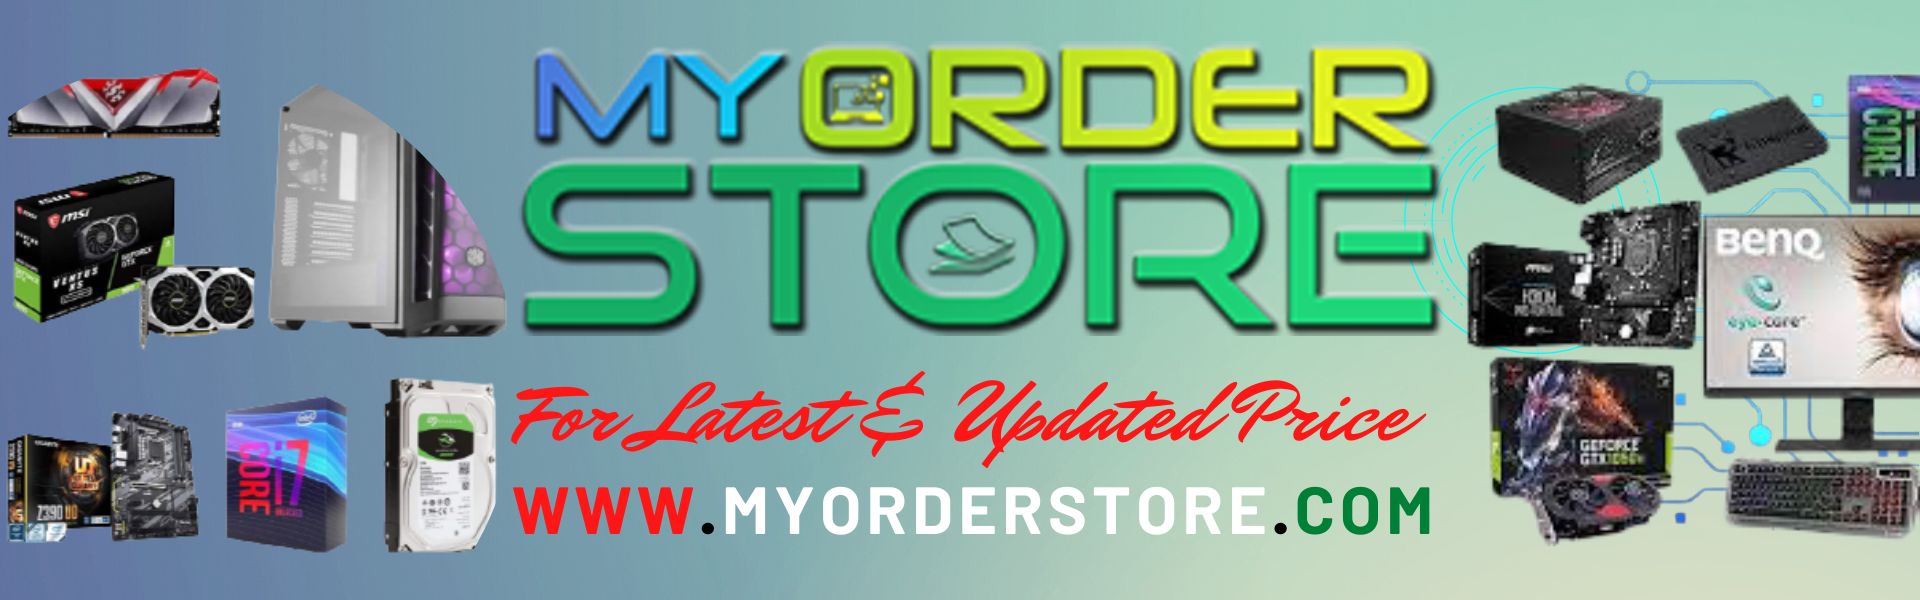 For Latest and Updated Price visit : www.myorderstore.com